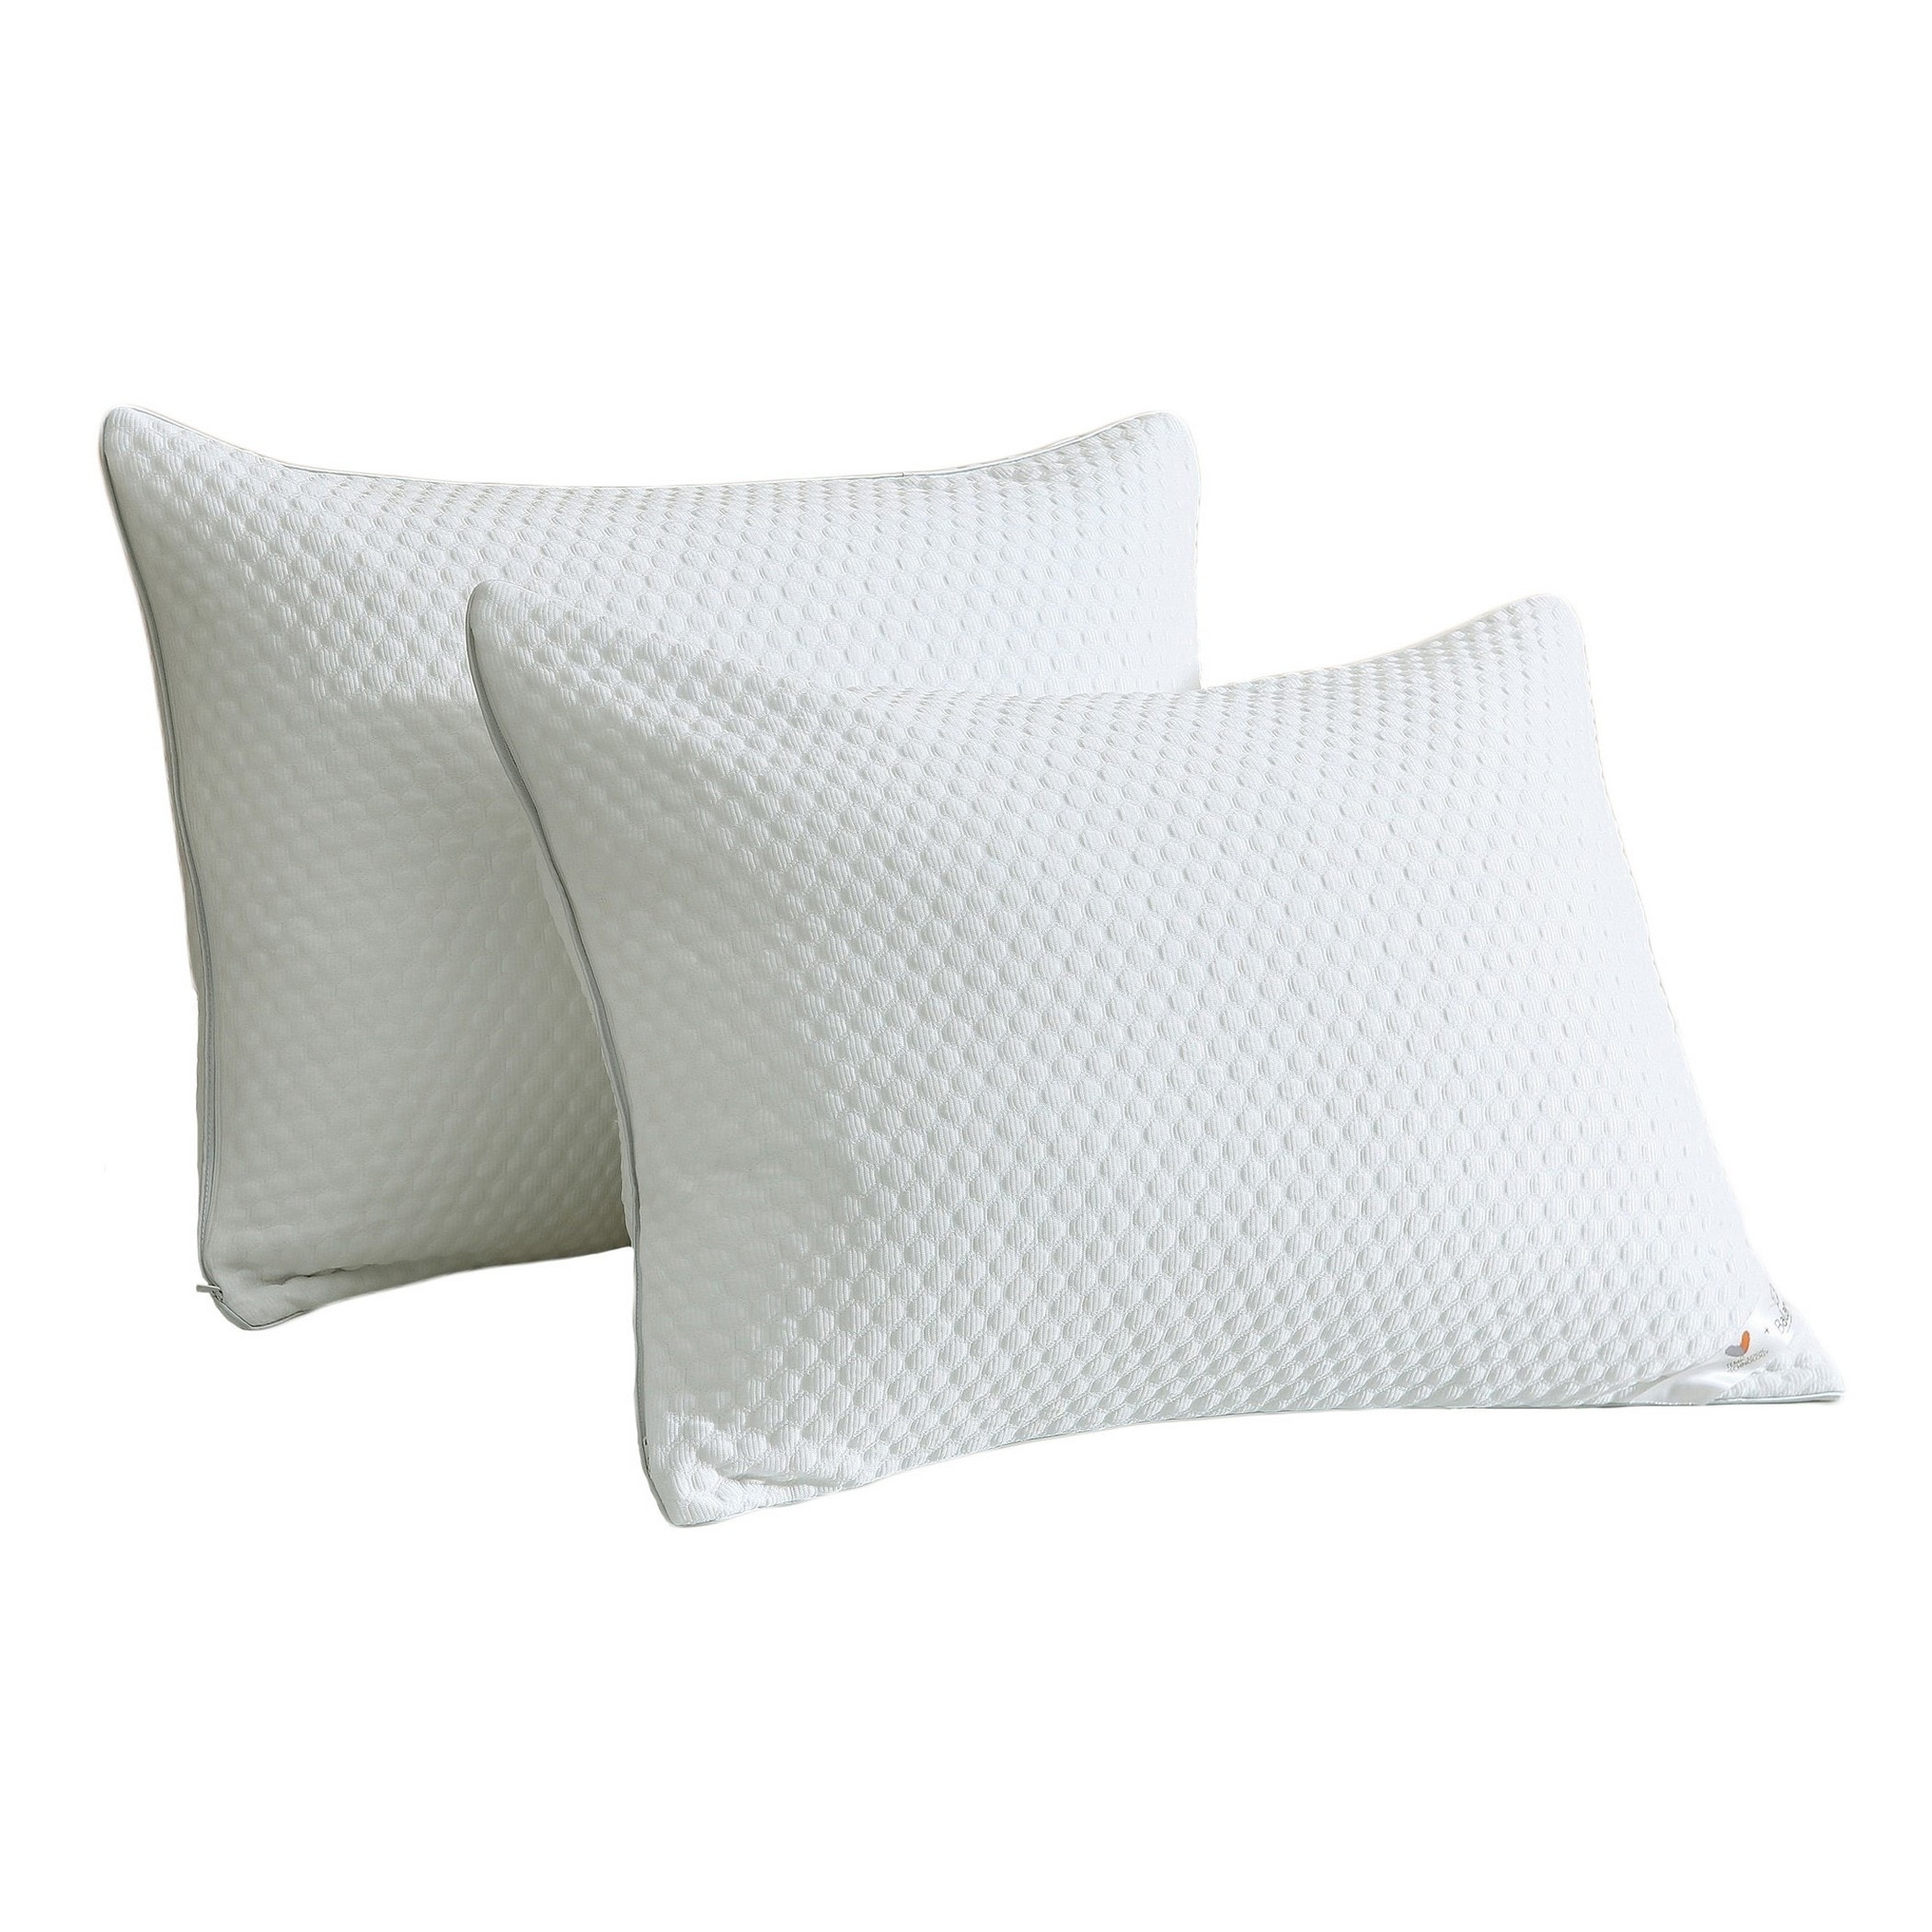 St. James Home Cool Knit with Balance Fill Pillow - White